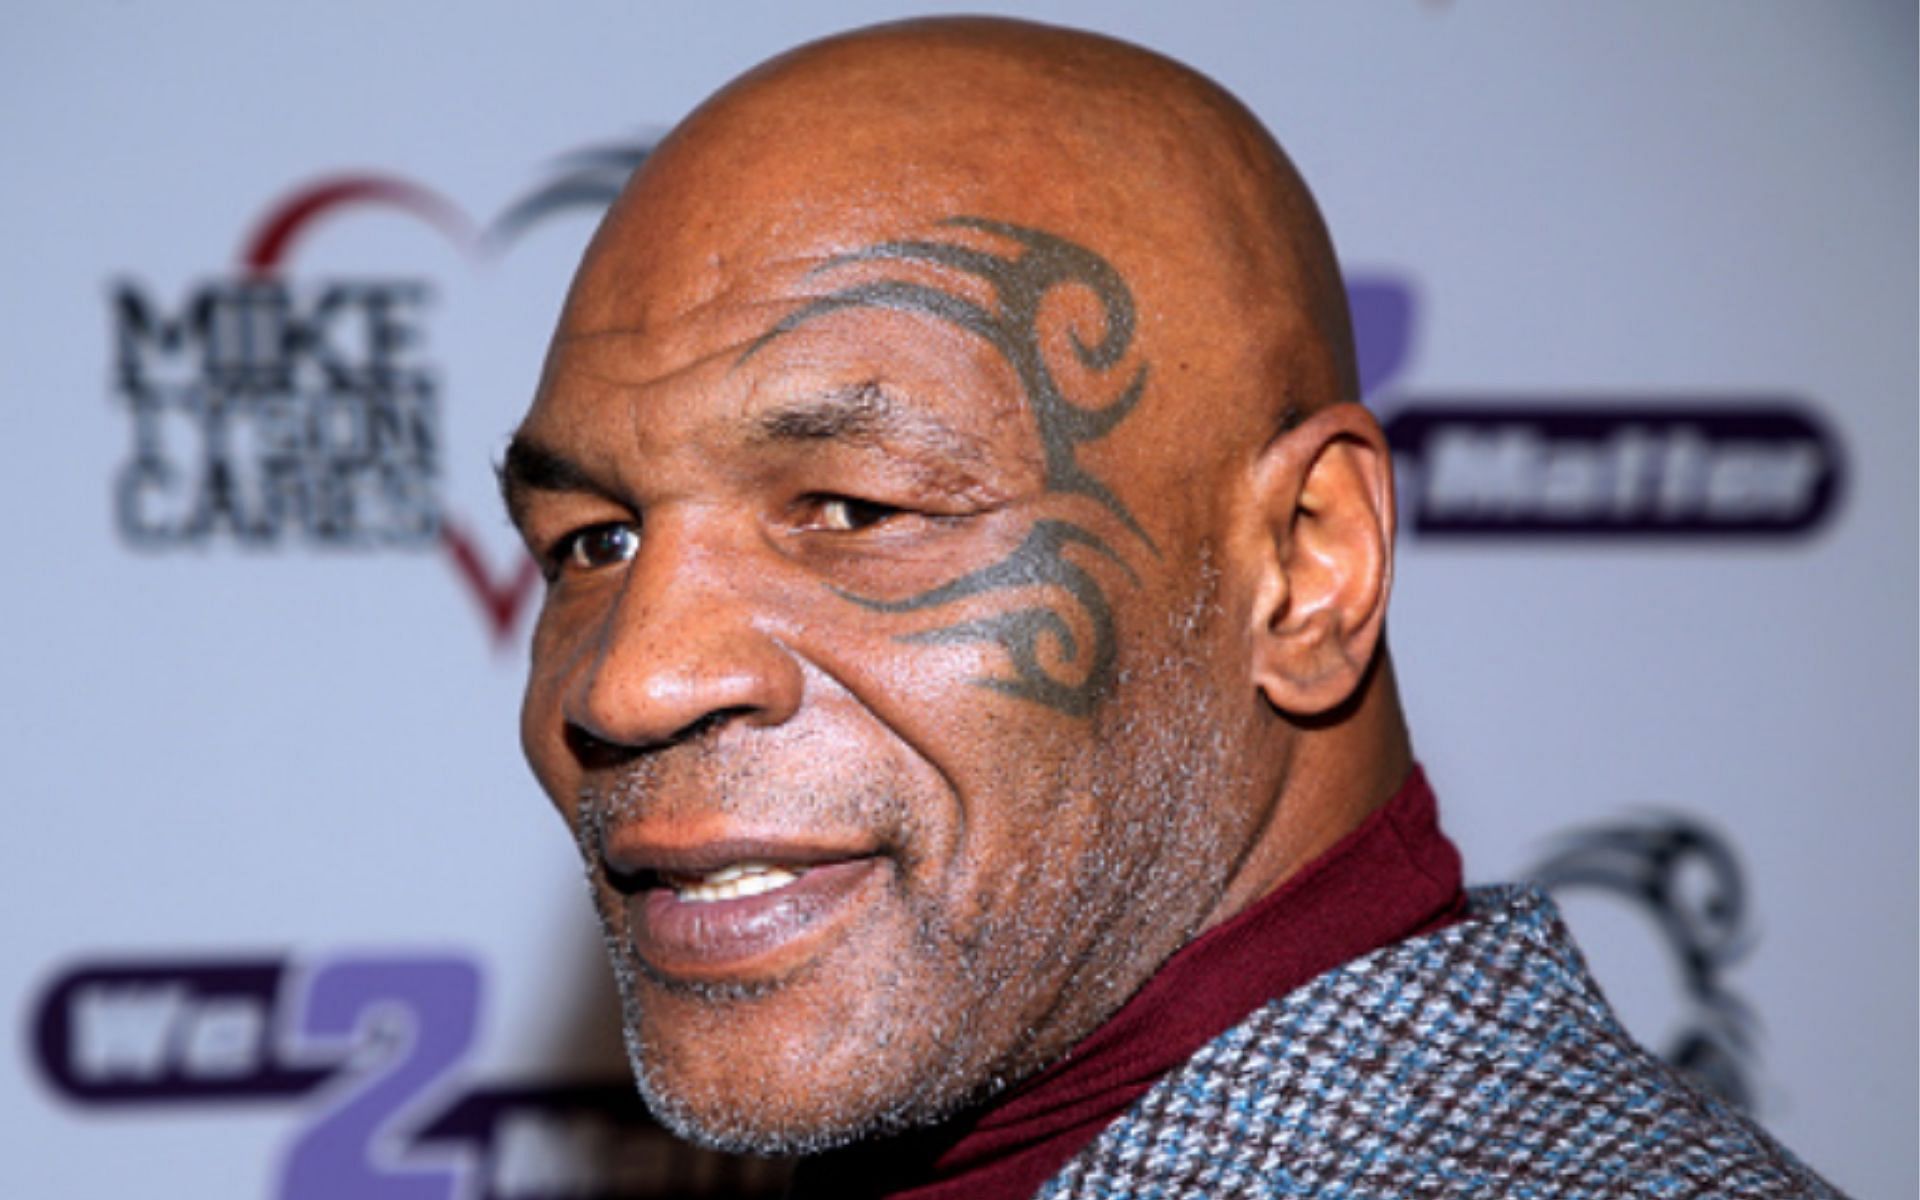 Mike Tyson is heralded amongst the greatest boxers of all time